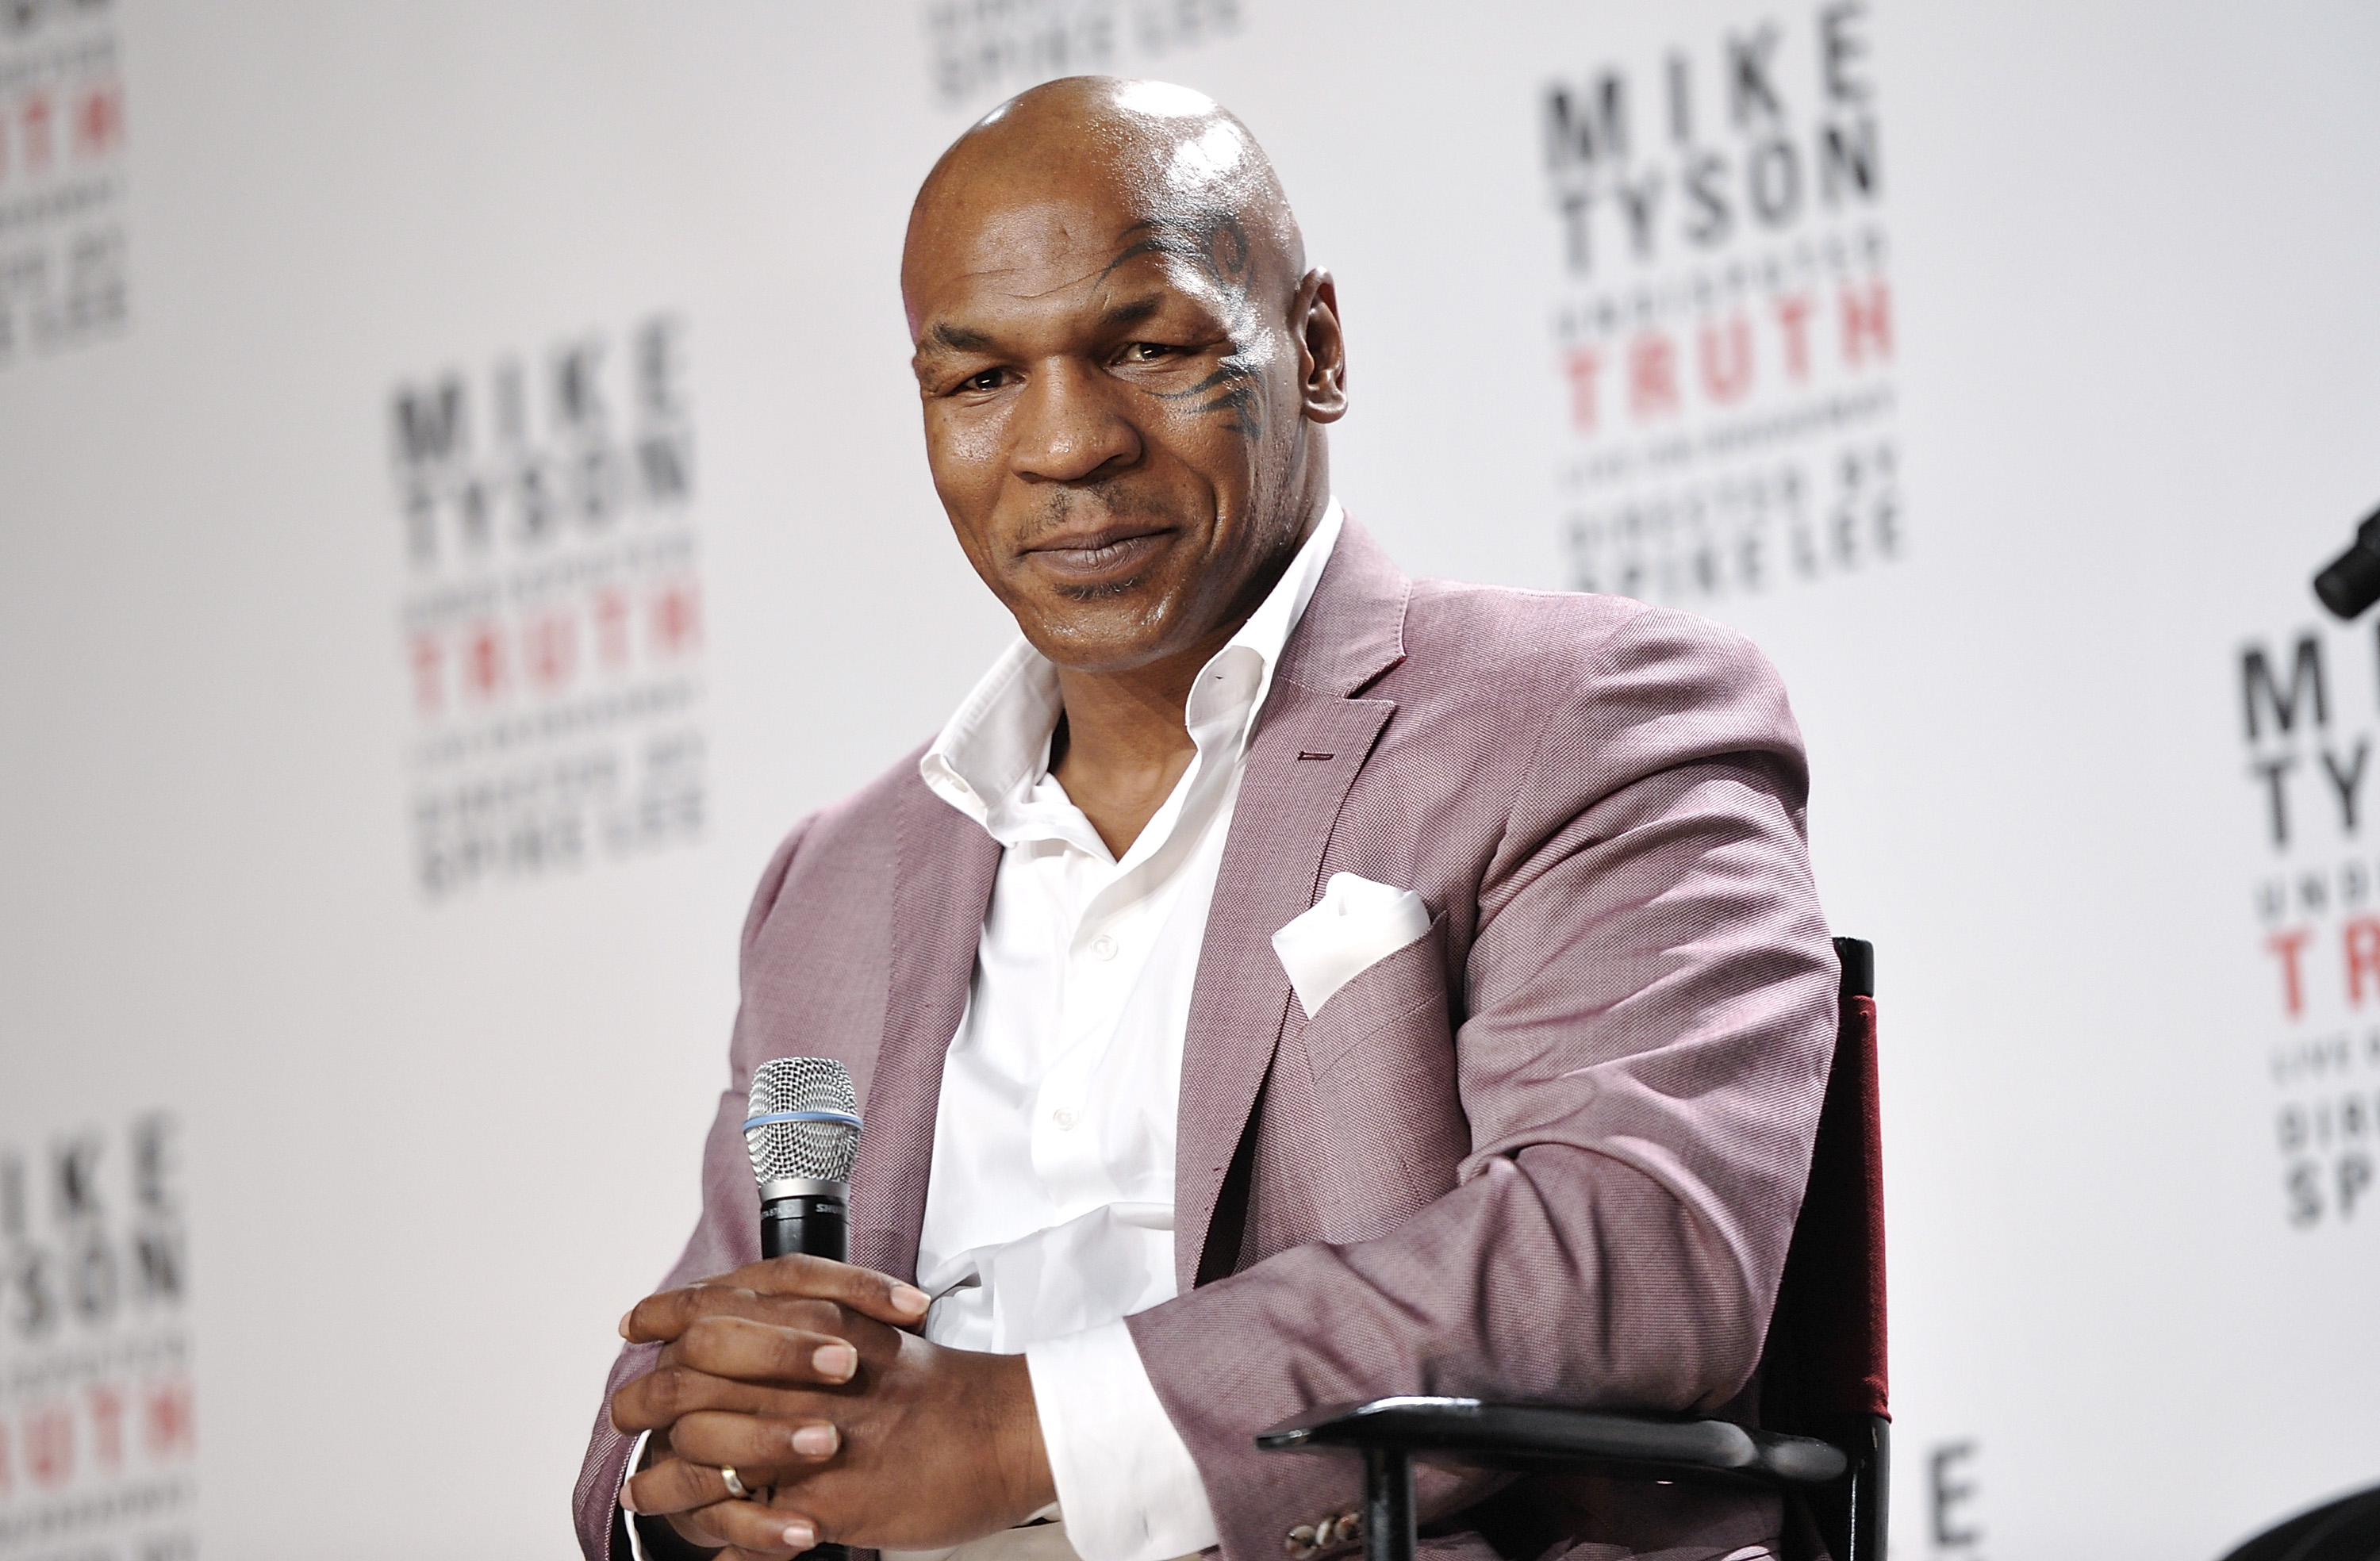 Mike Tyson returning to Tampa Bay with one-man Broadway show